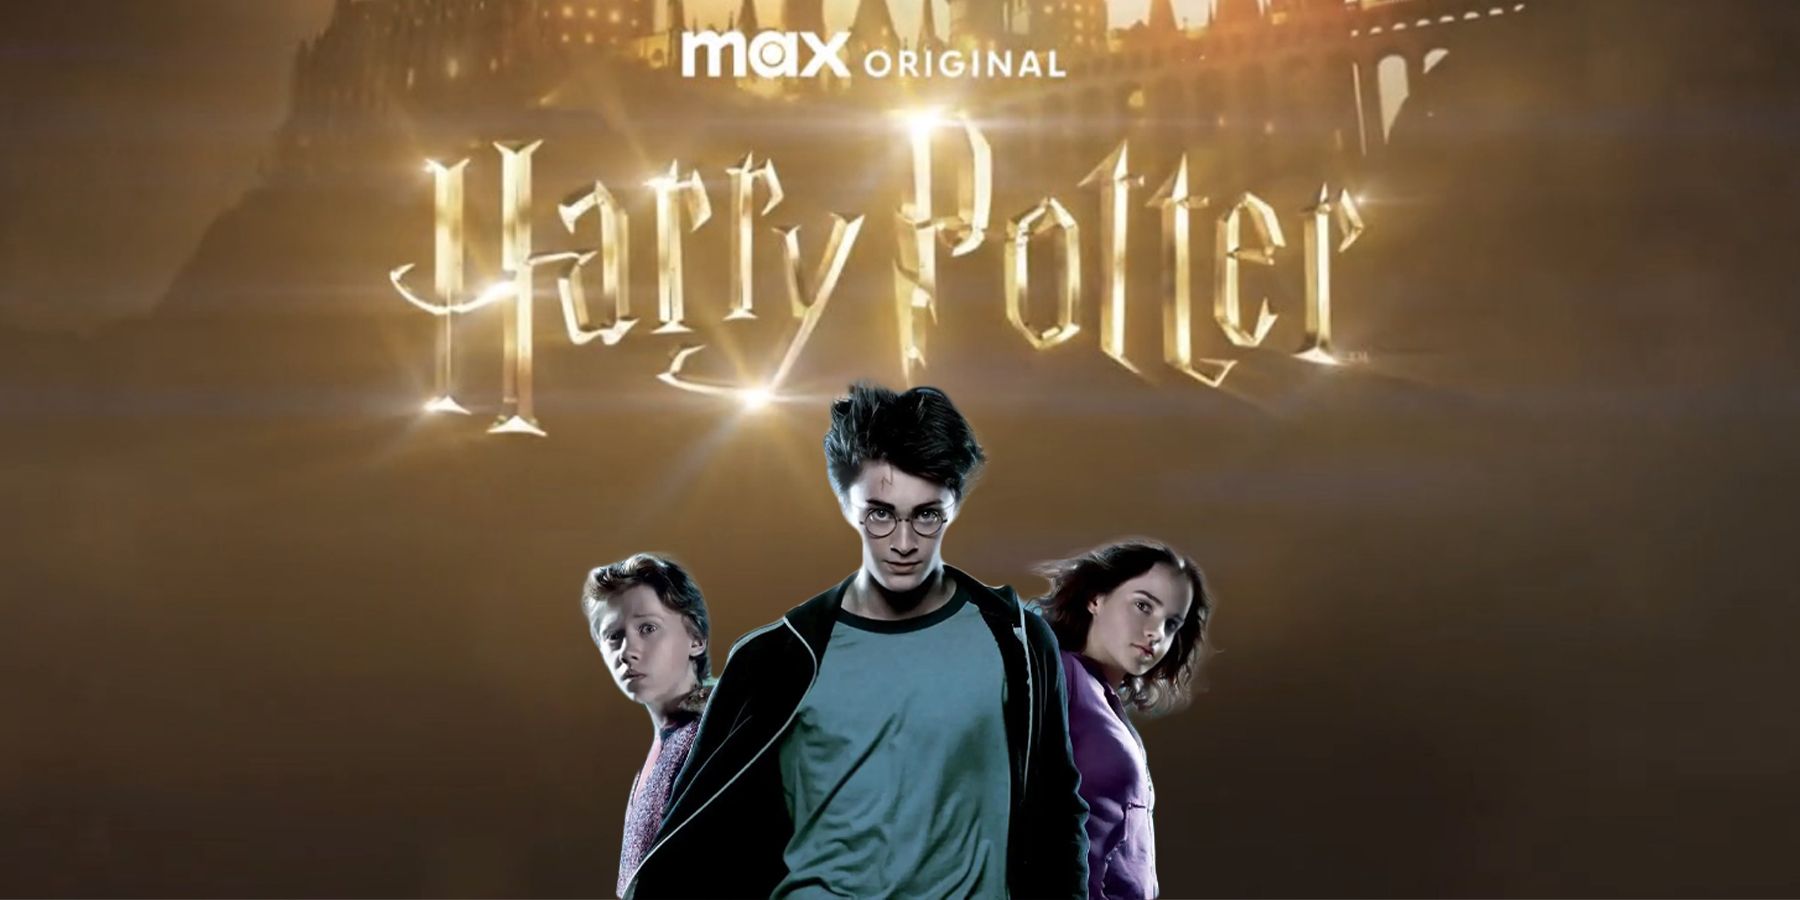 Harry Potter Might Get Rebooted into HBO TV Series